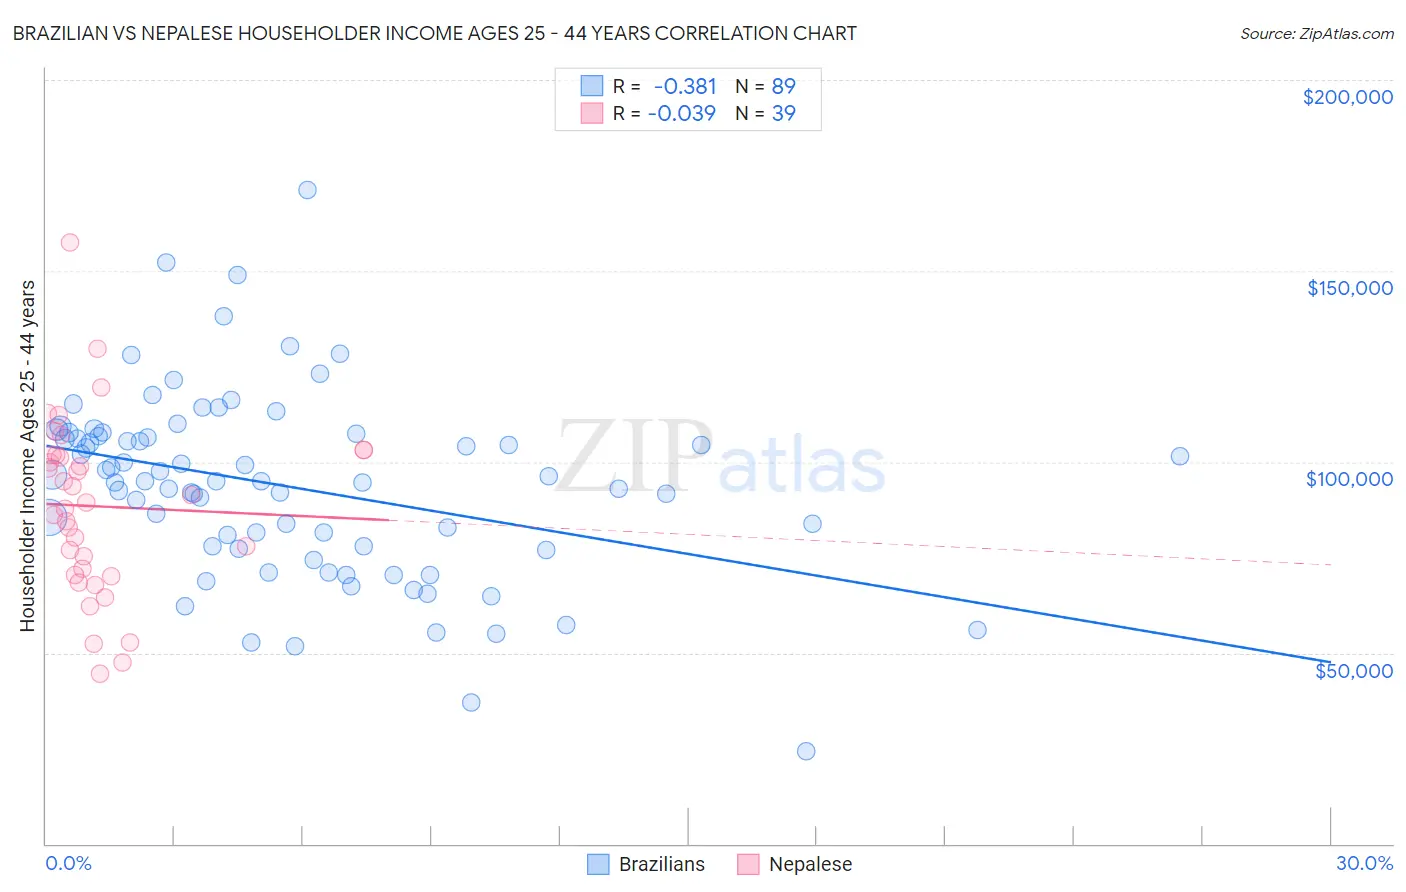 Brazilian vs Nepalese Householder Income Ages 25 - 44 years